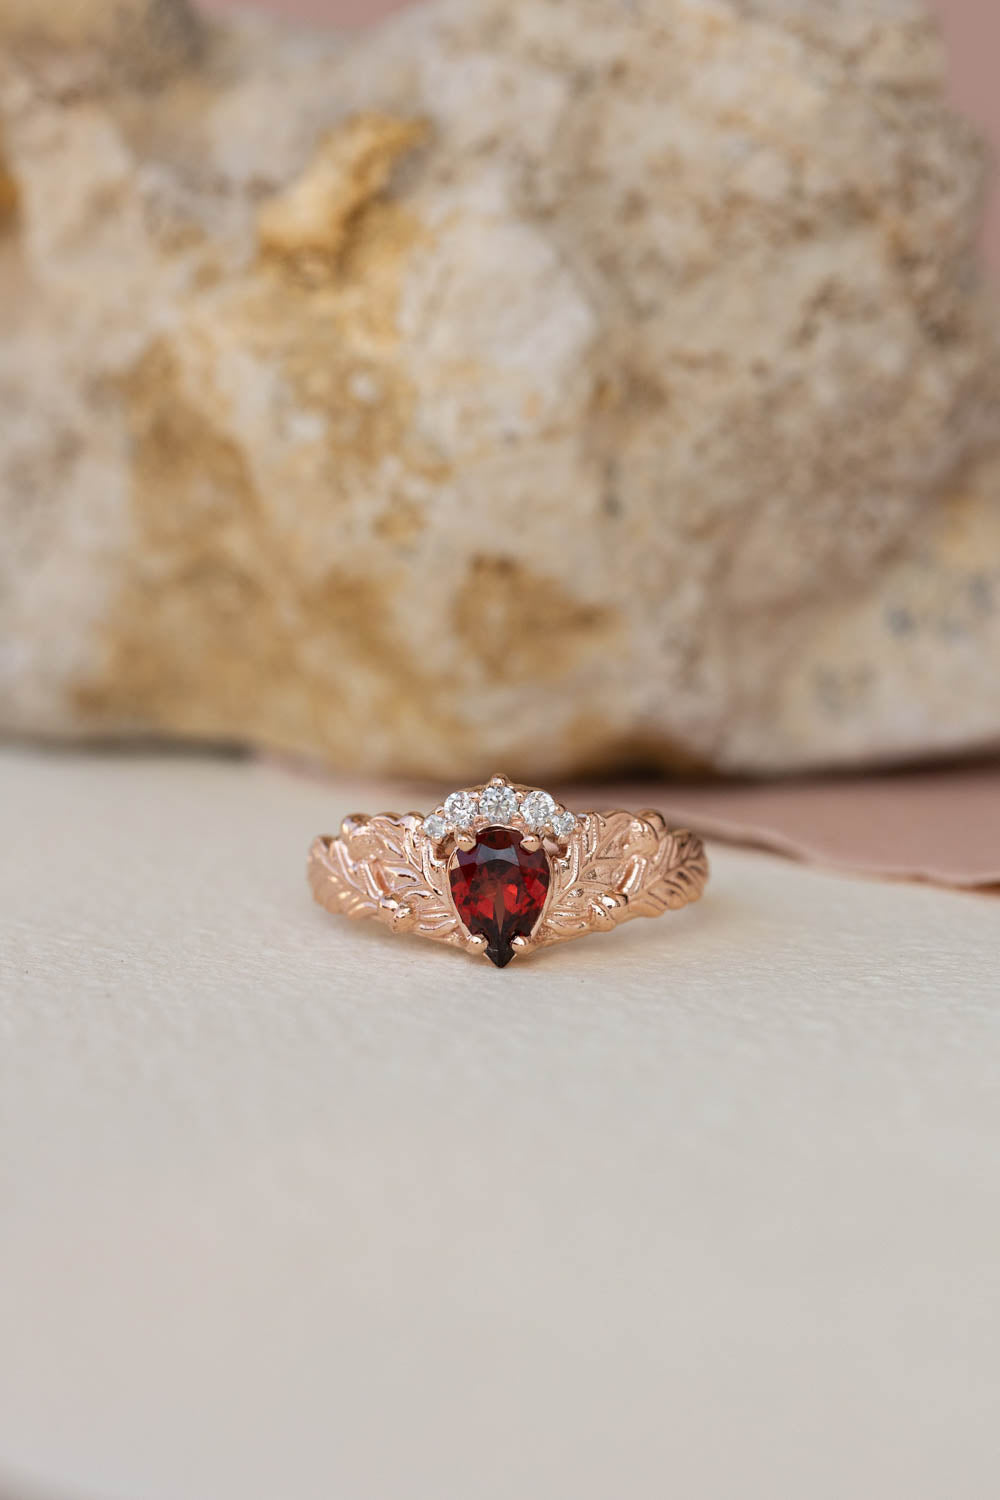 Oak leaves bridal ring set with natural garnet, nature inspired engagement and wedding rings / Royal Oak - Eden Garden Jewelry™